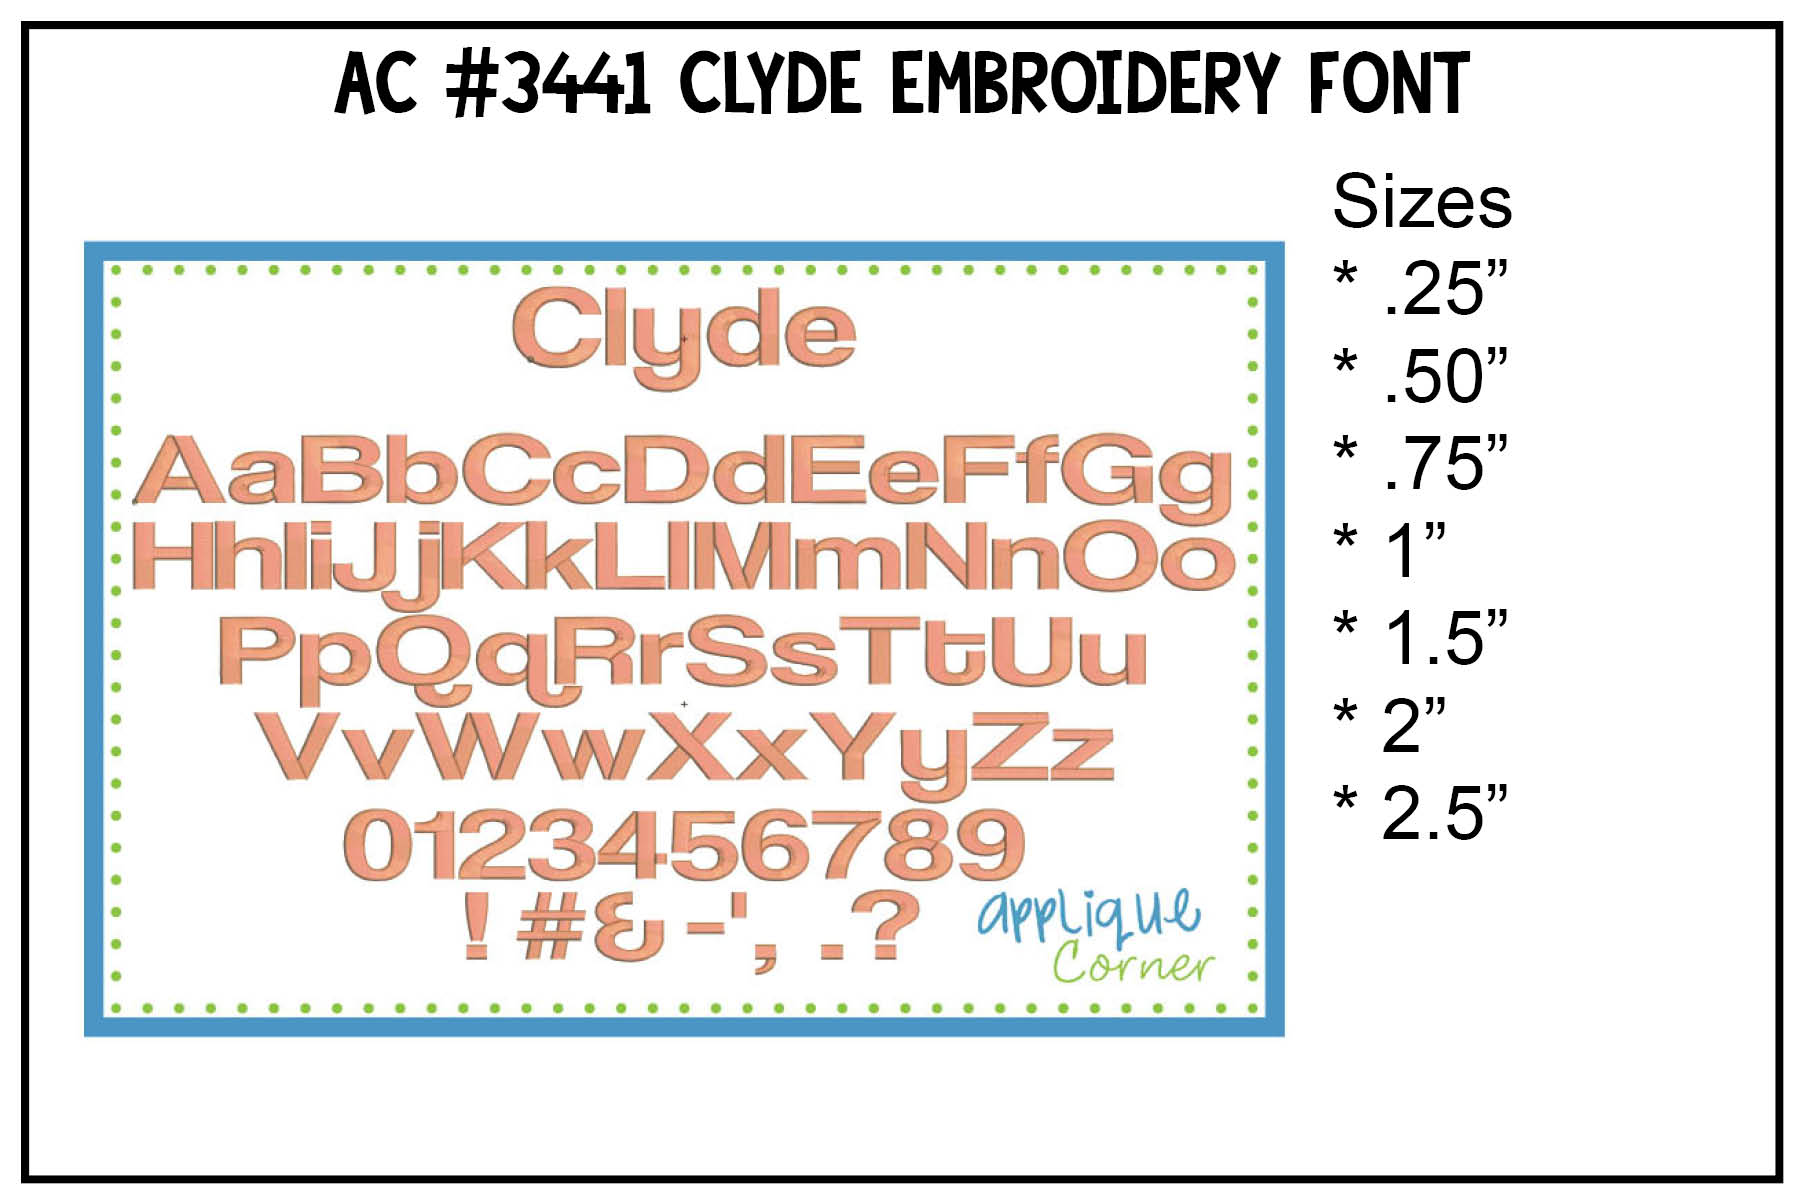 Clyde Embroidery Font